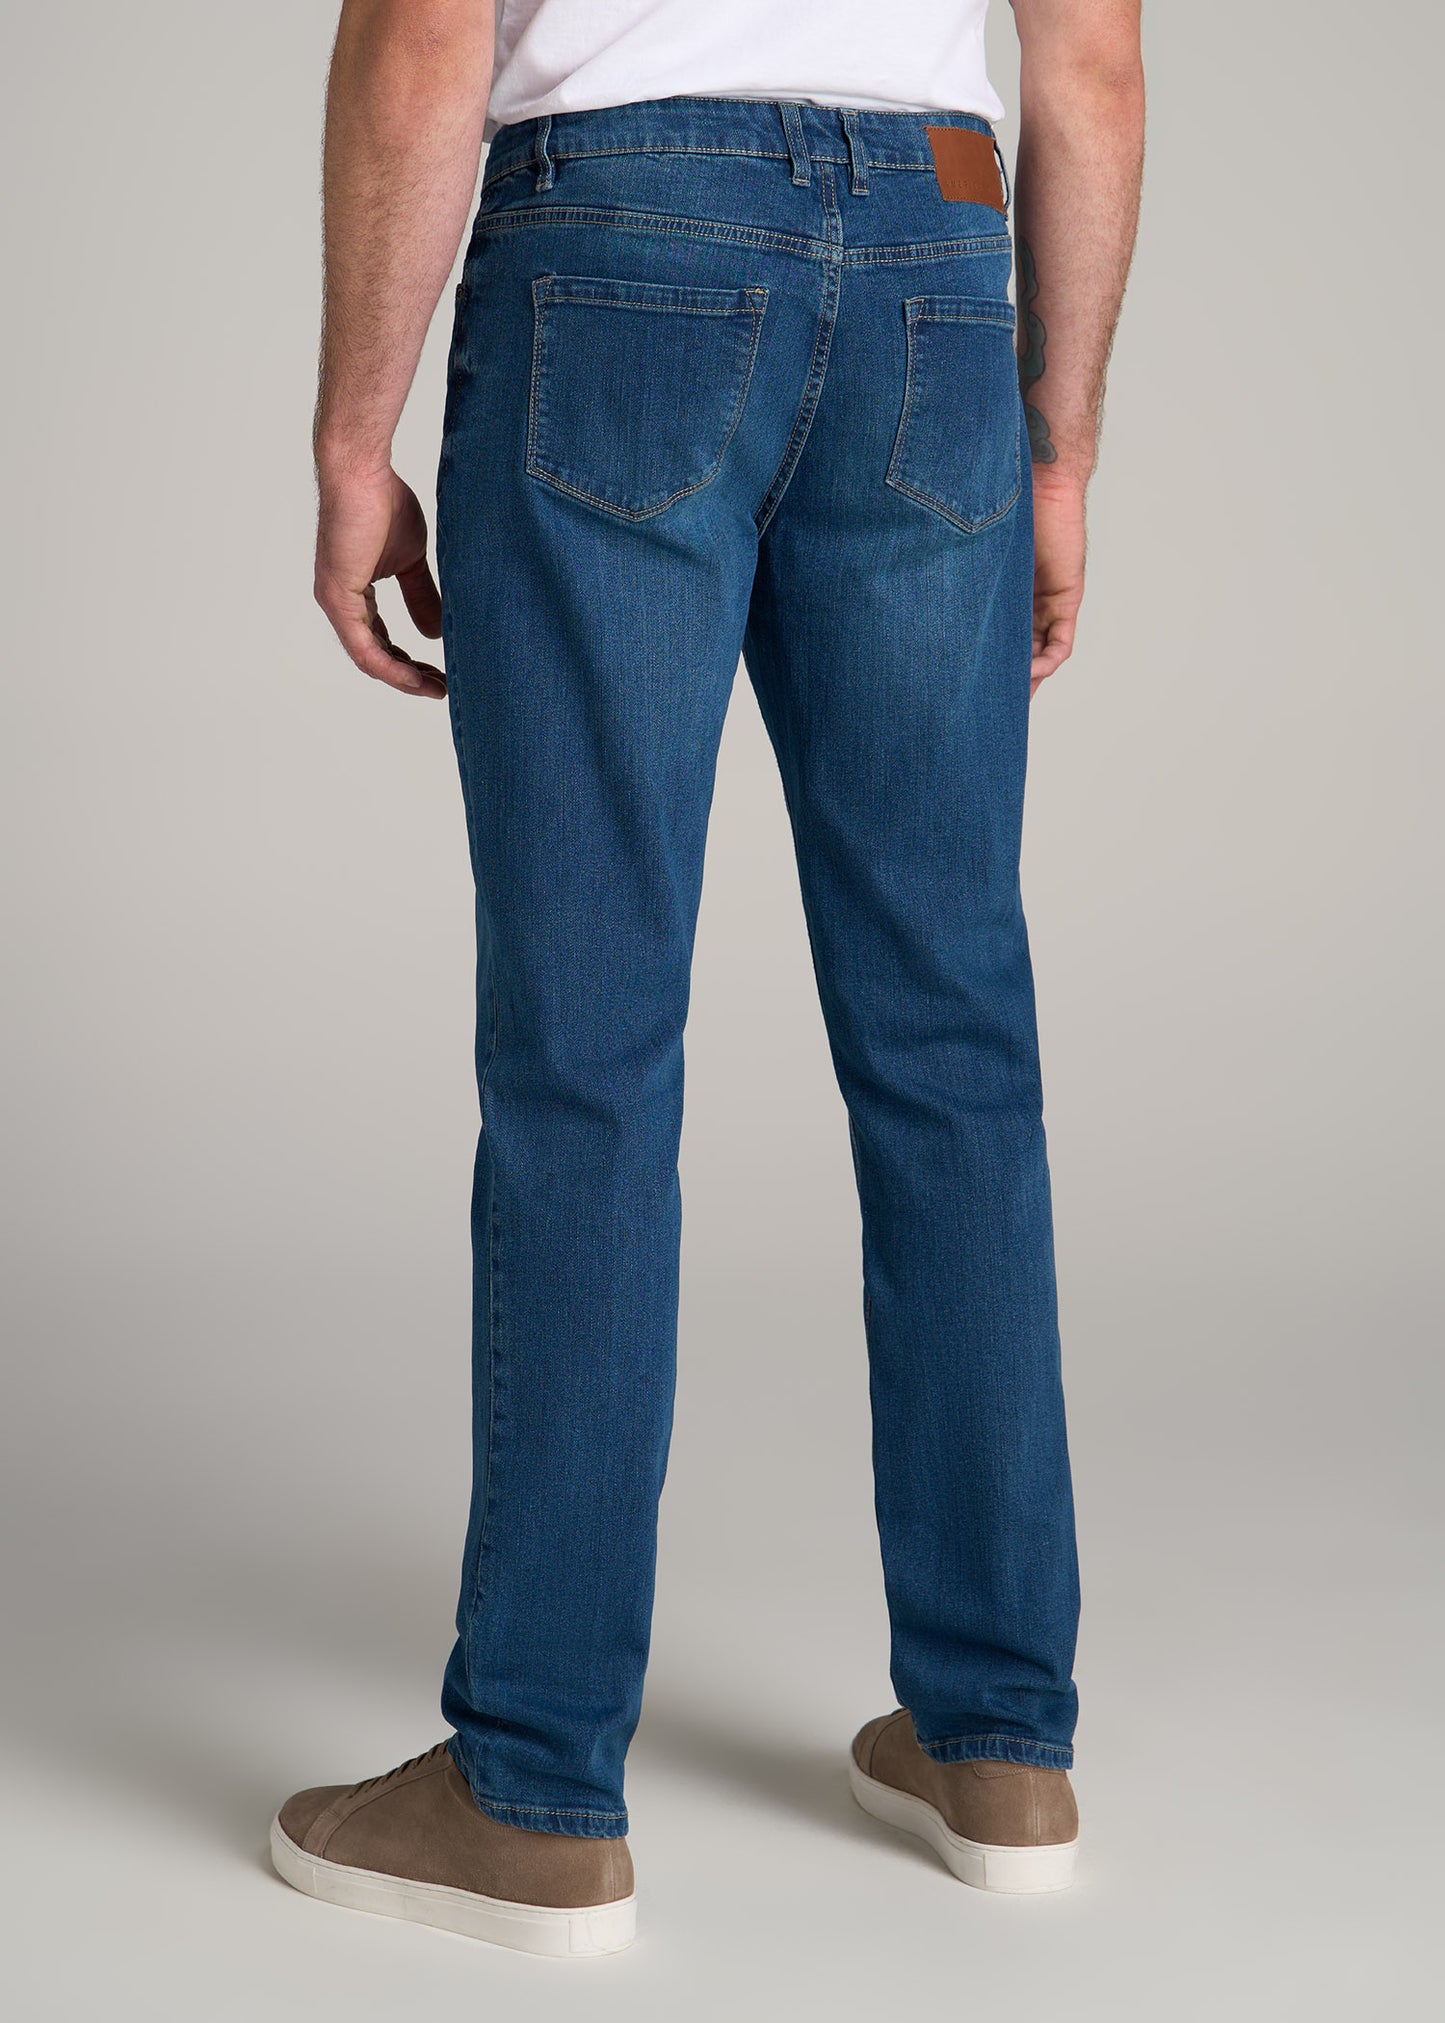 Mason RELAXED Jeans for Tall Men in Signature Fade